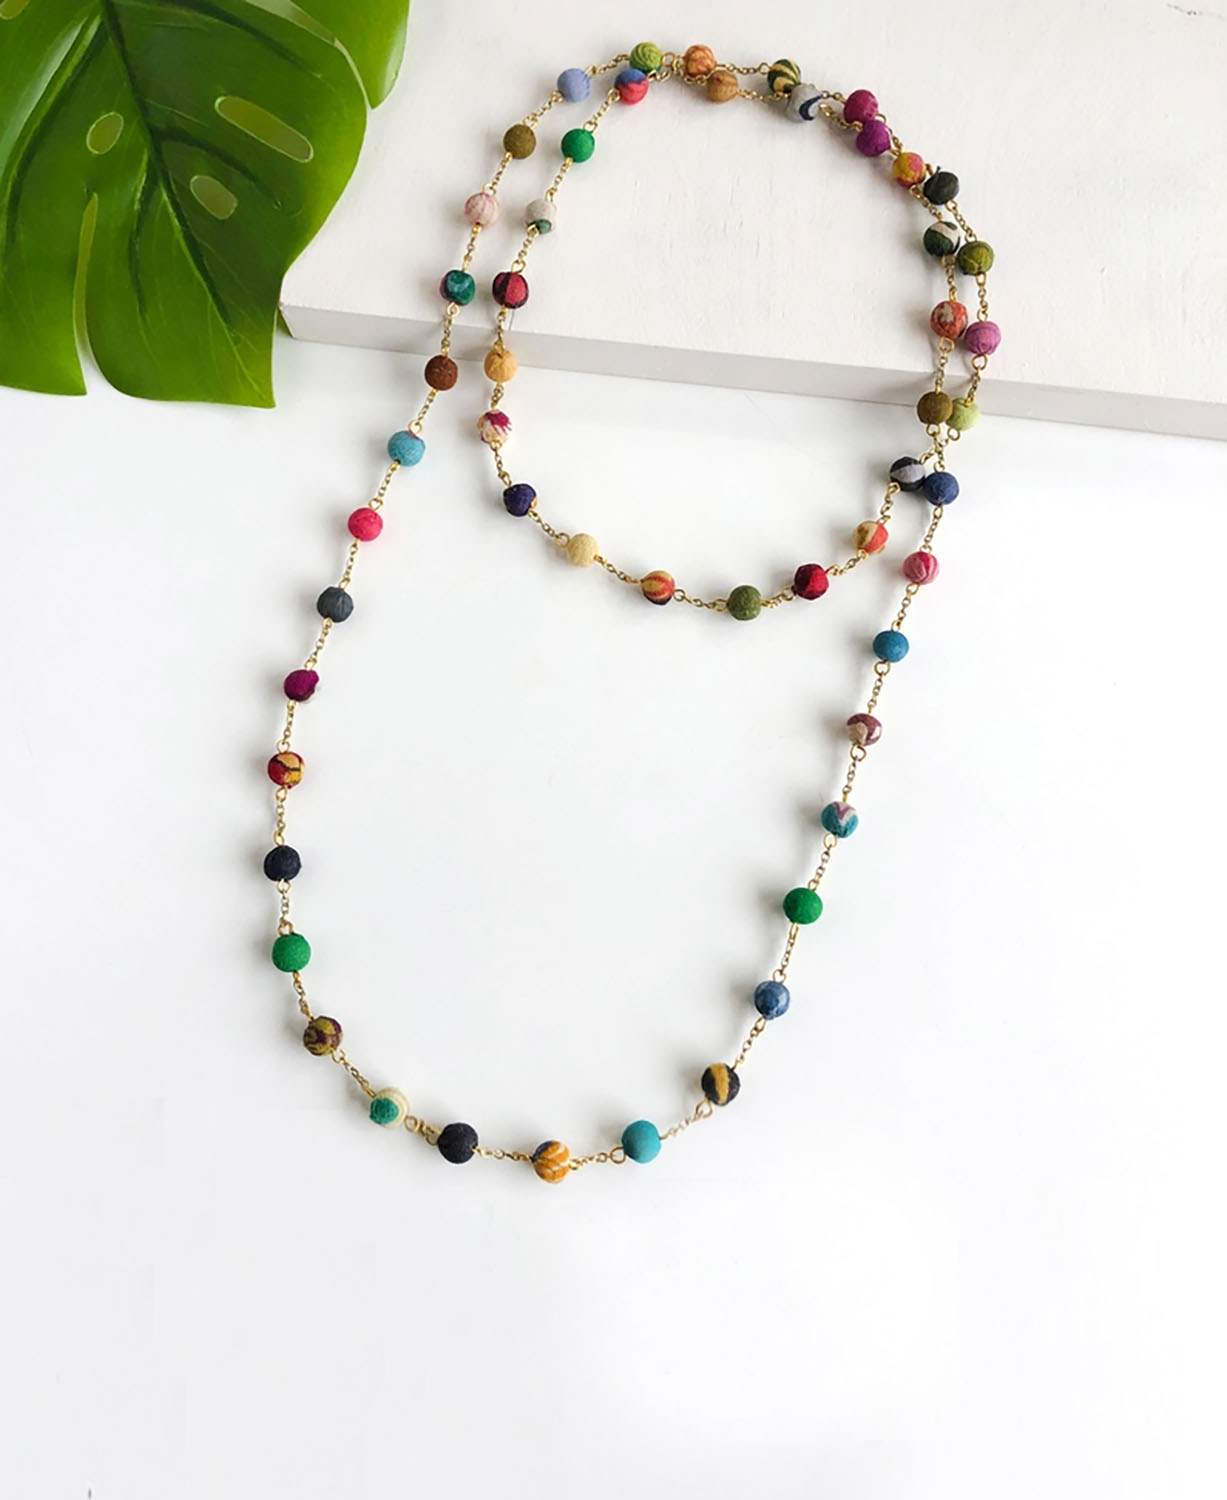 NEW! Kantha Beaded Chain Necklace